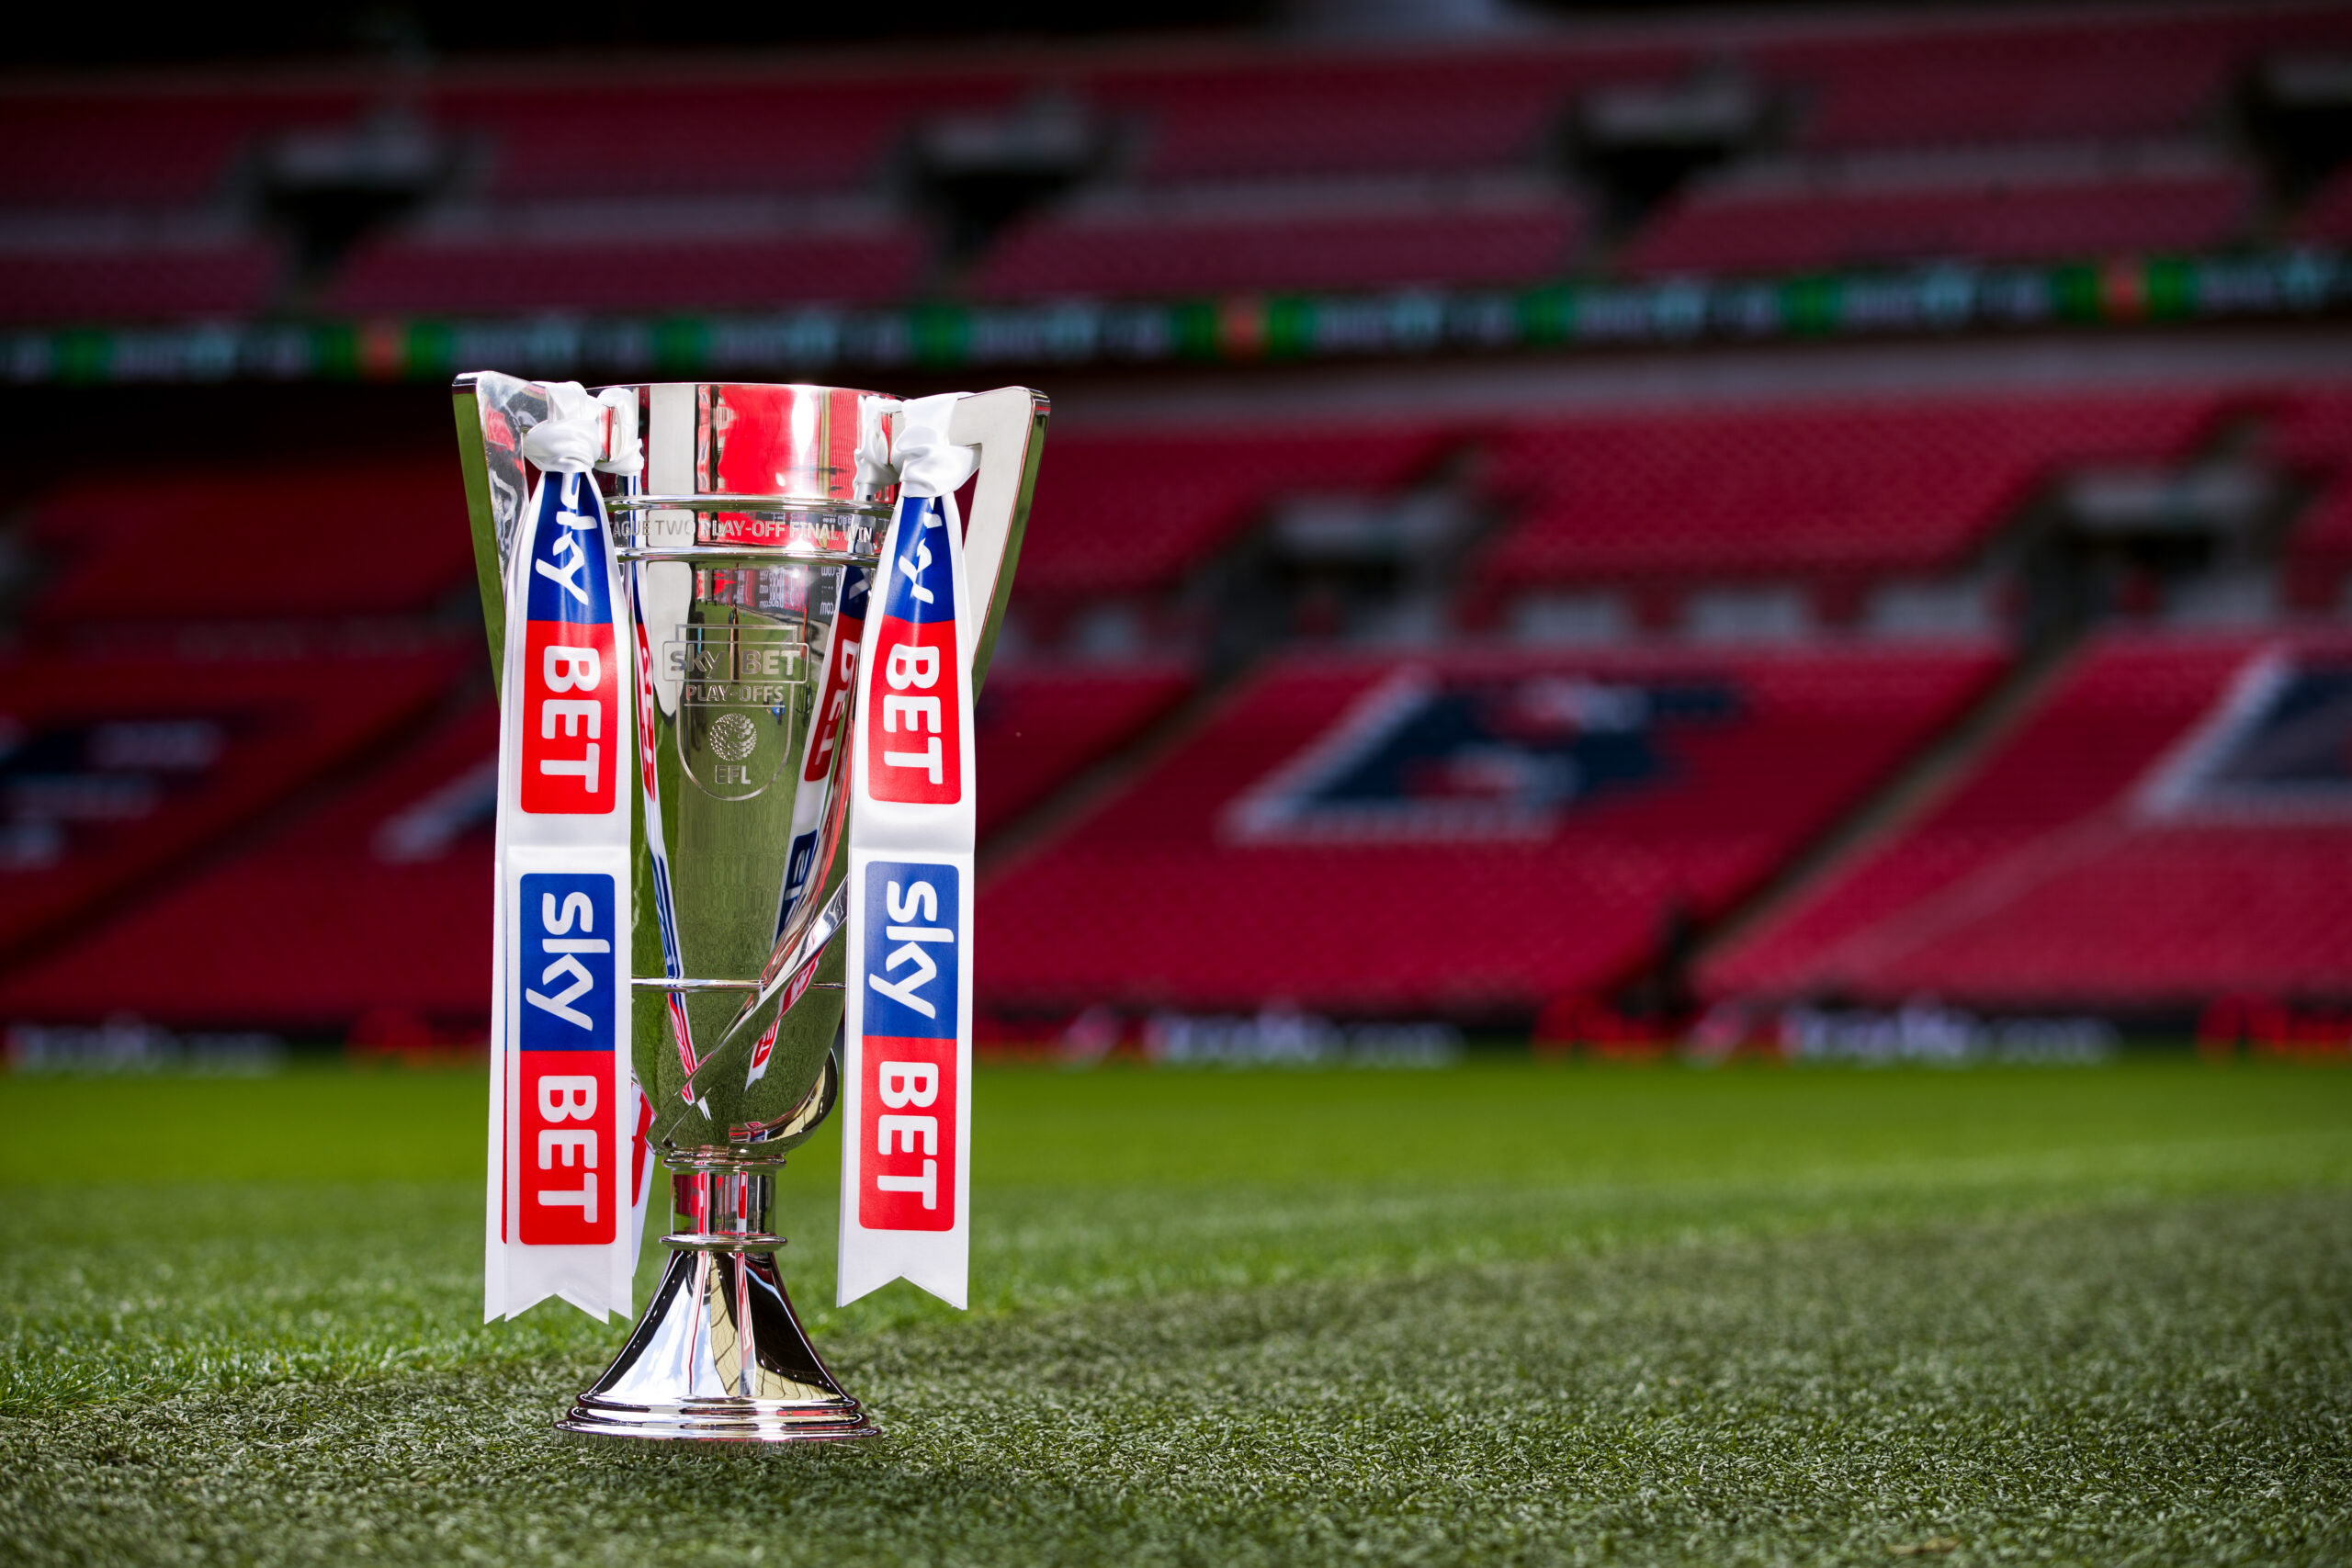 2018/19 Sky Bet Championship table: Predict how the 24 teams will